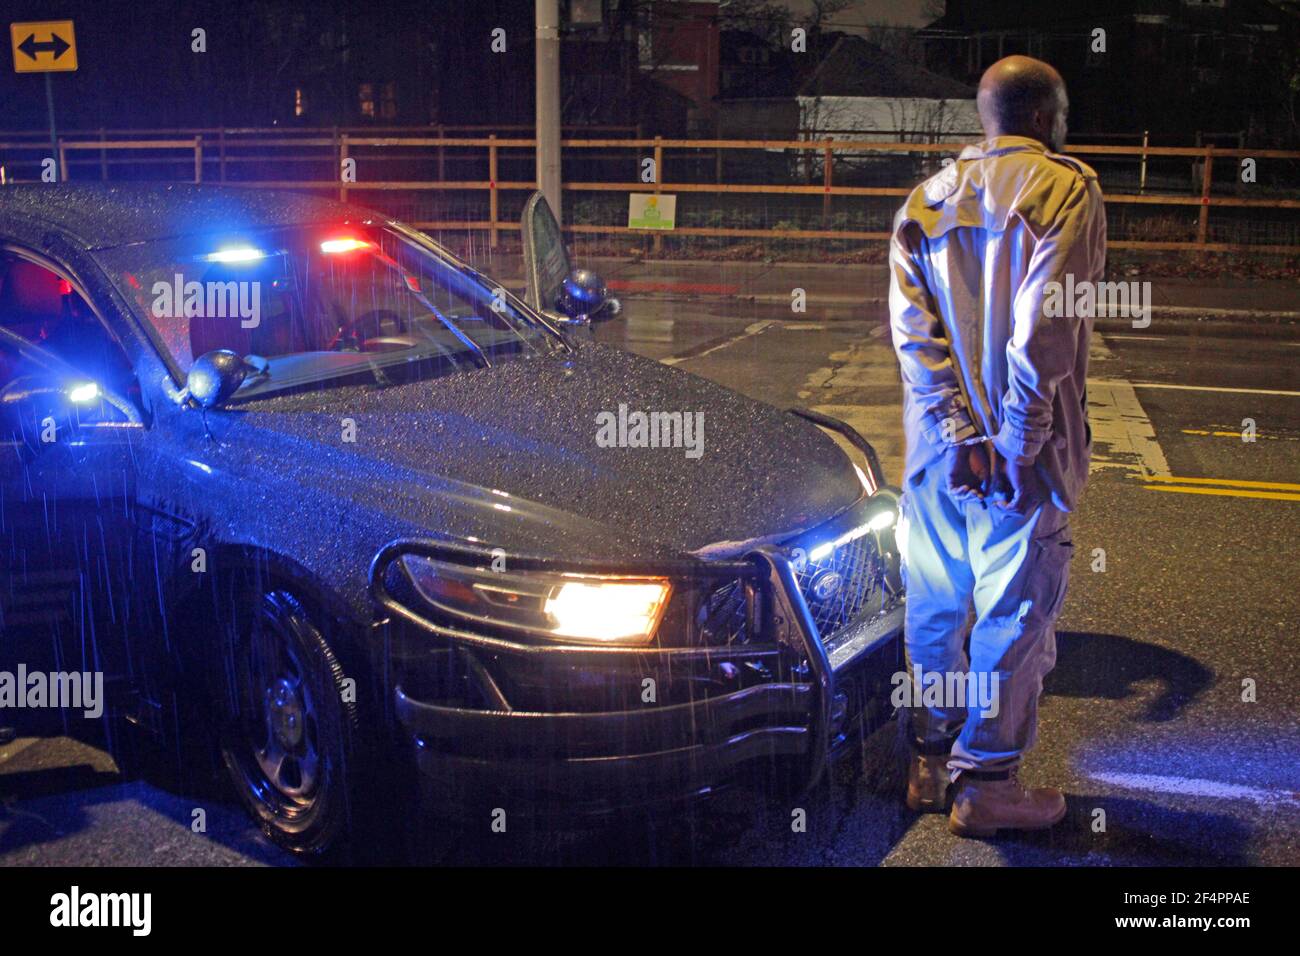 A man is handcuffed and detained by police in Detroit, Michigan, USA Stock Photo